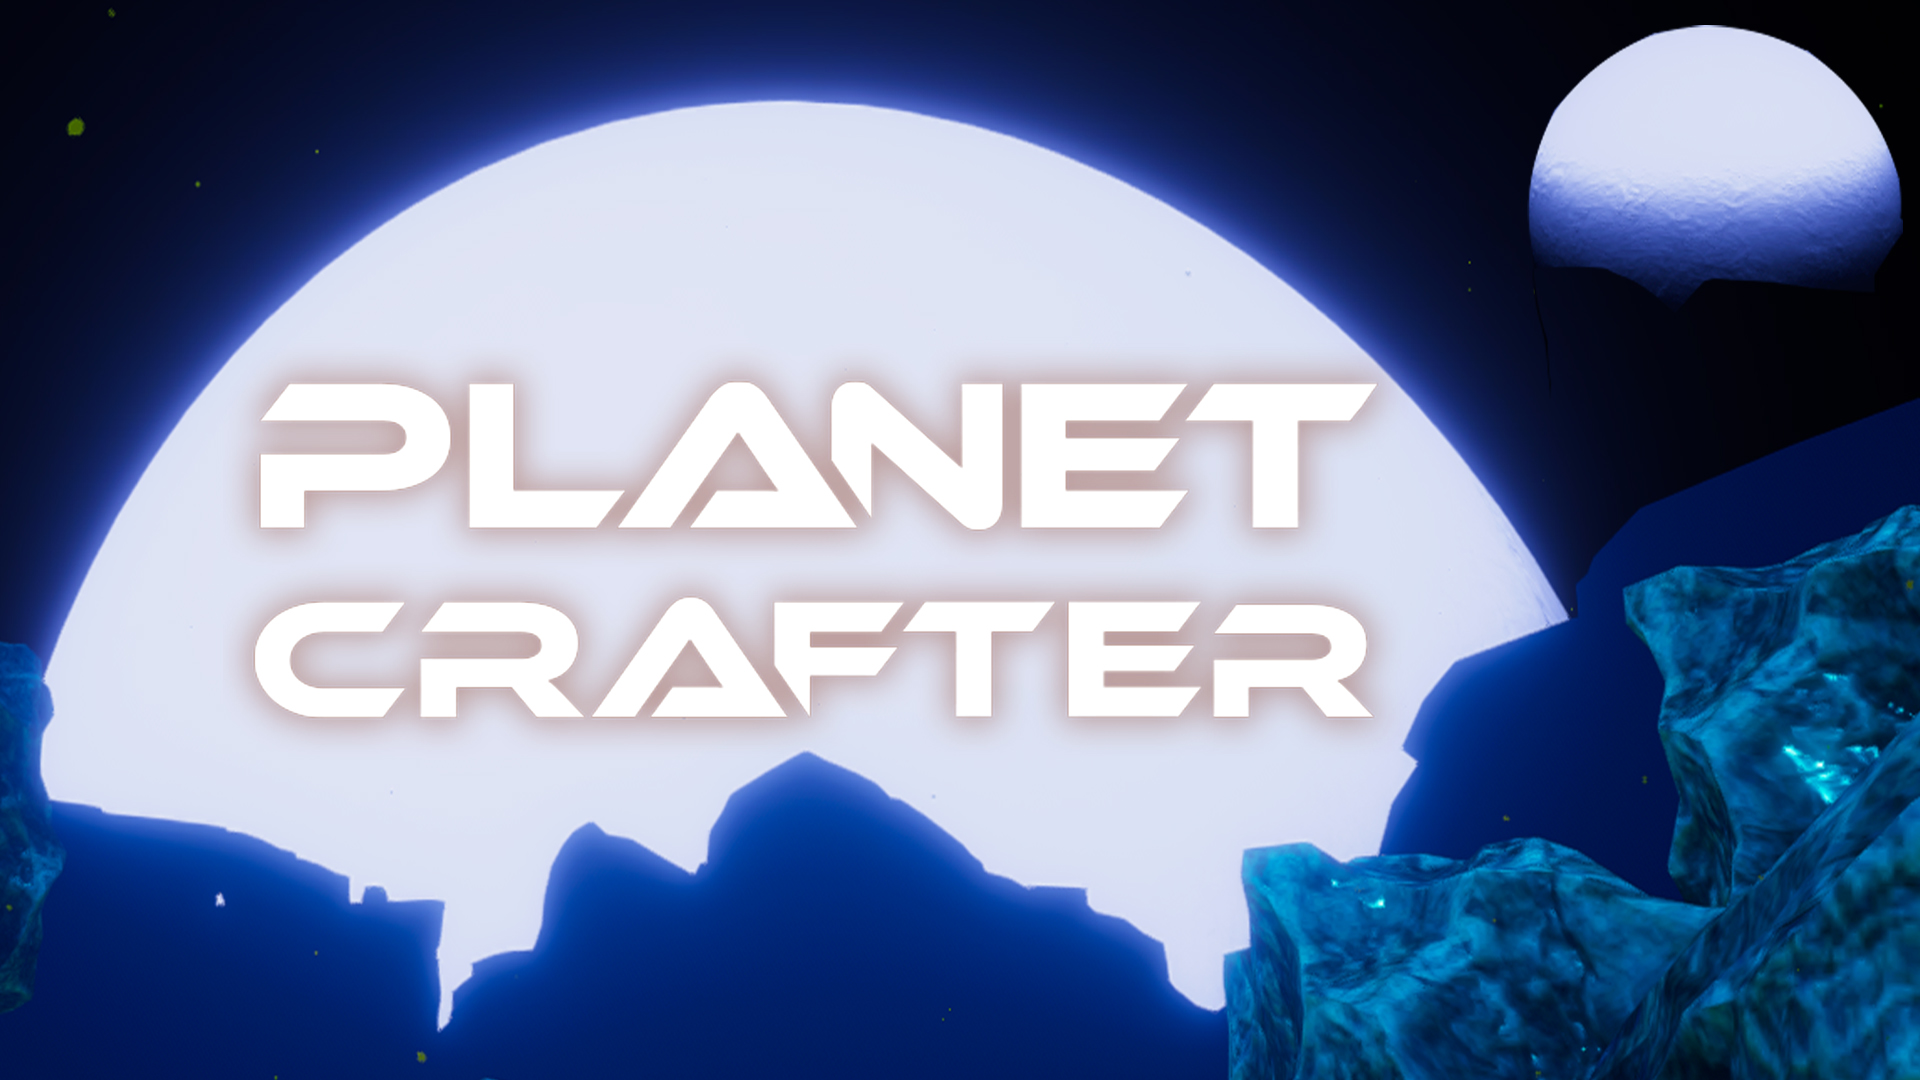 The planet crafter читы. The Planet Crafter обои.